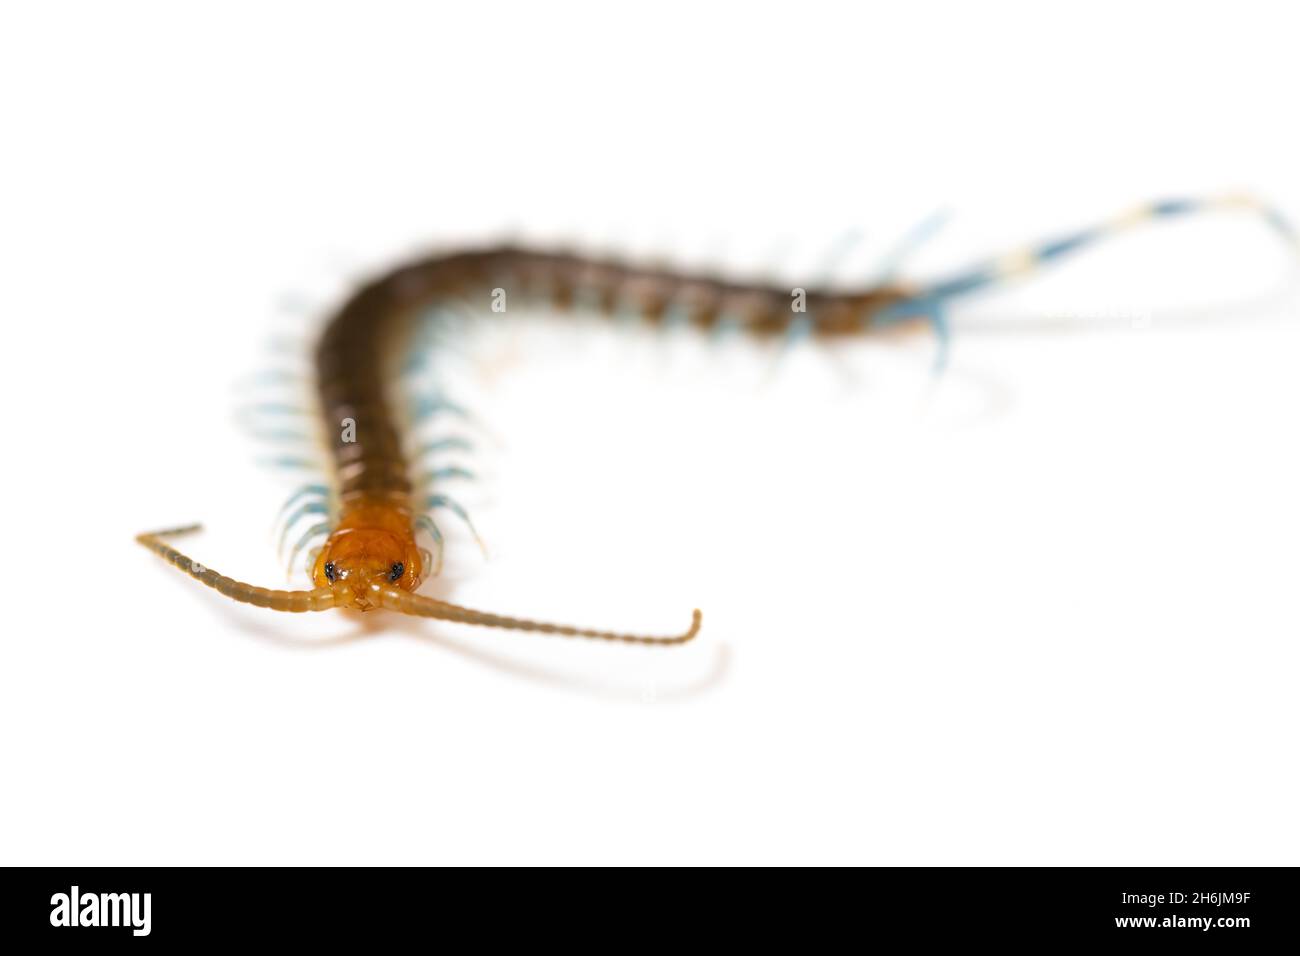 Centipede on a white background Stock Photo